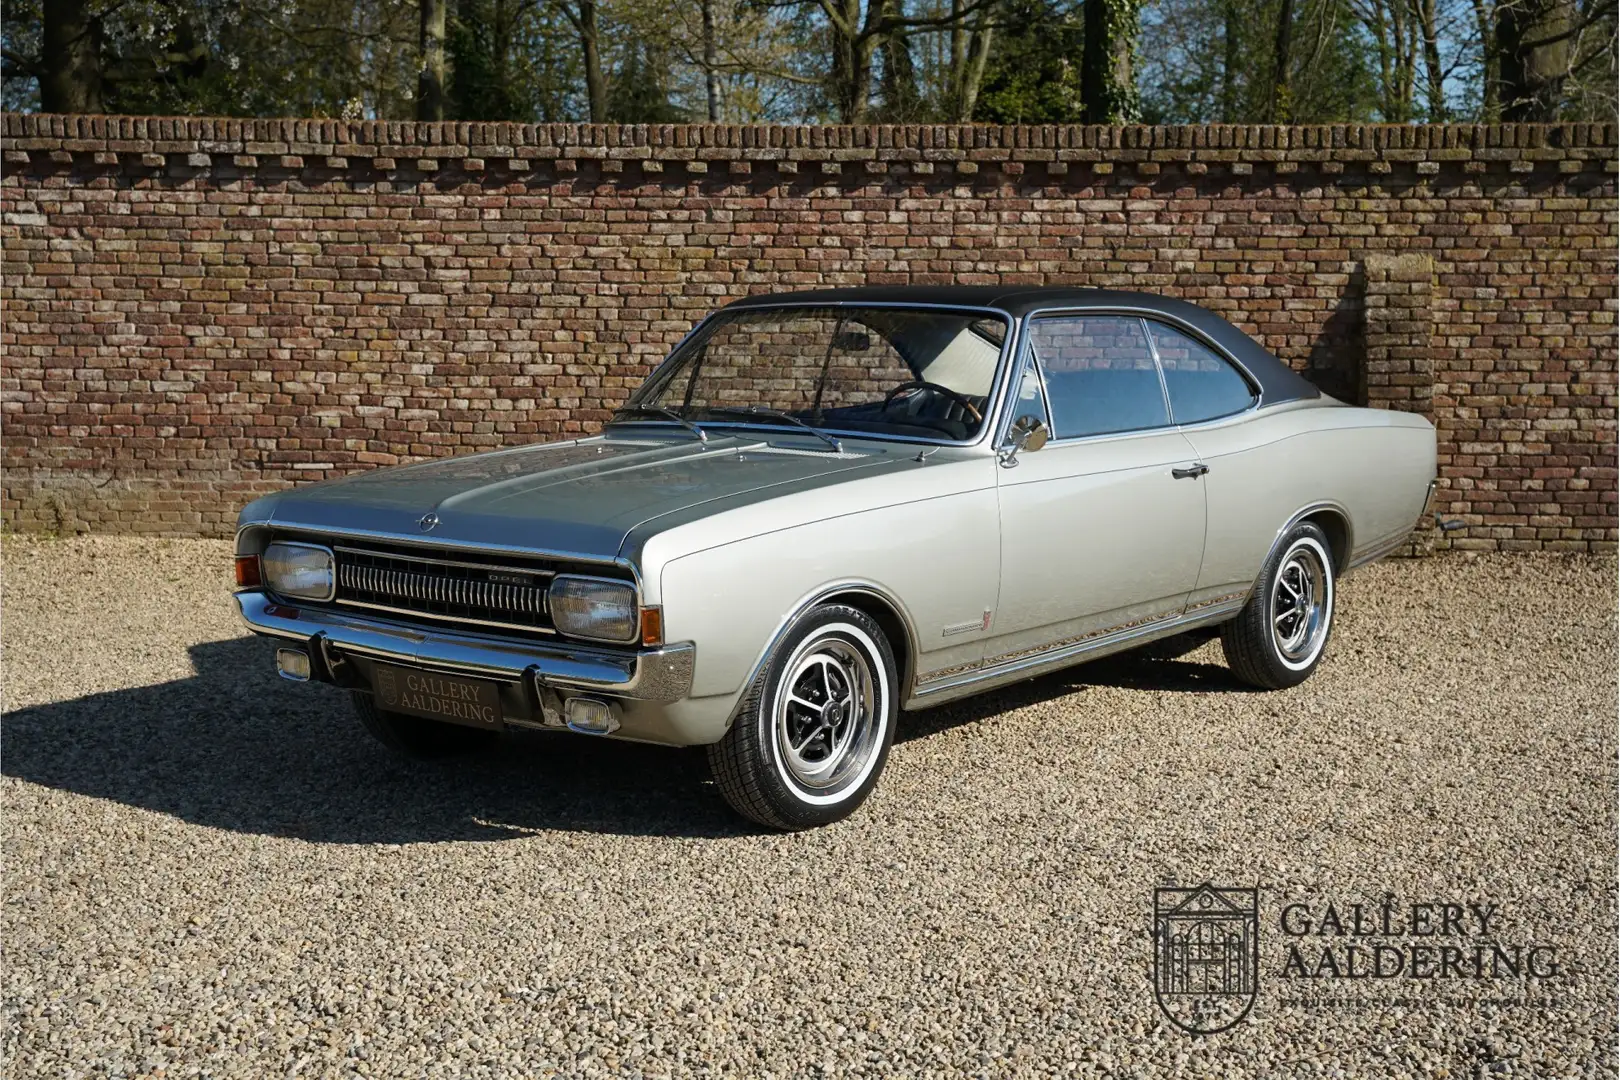 Opel Commodore 2500 S Coupé Dutch delivered car, early series Com siva - 1